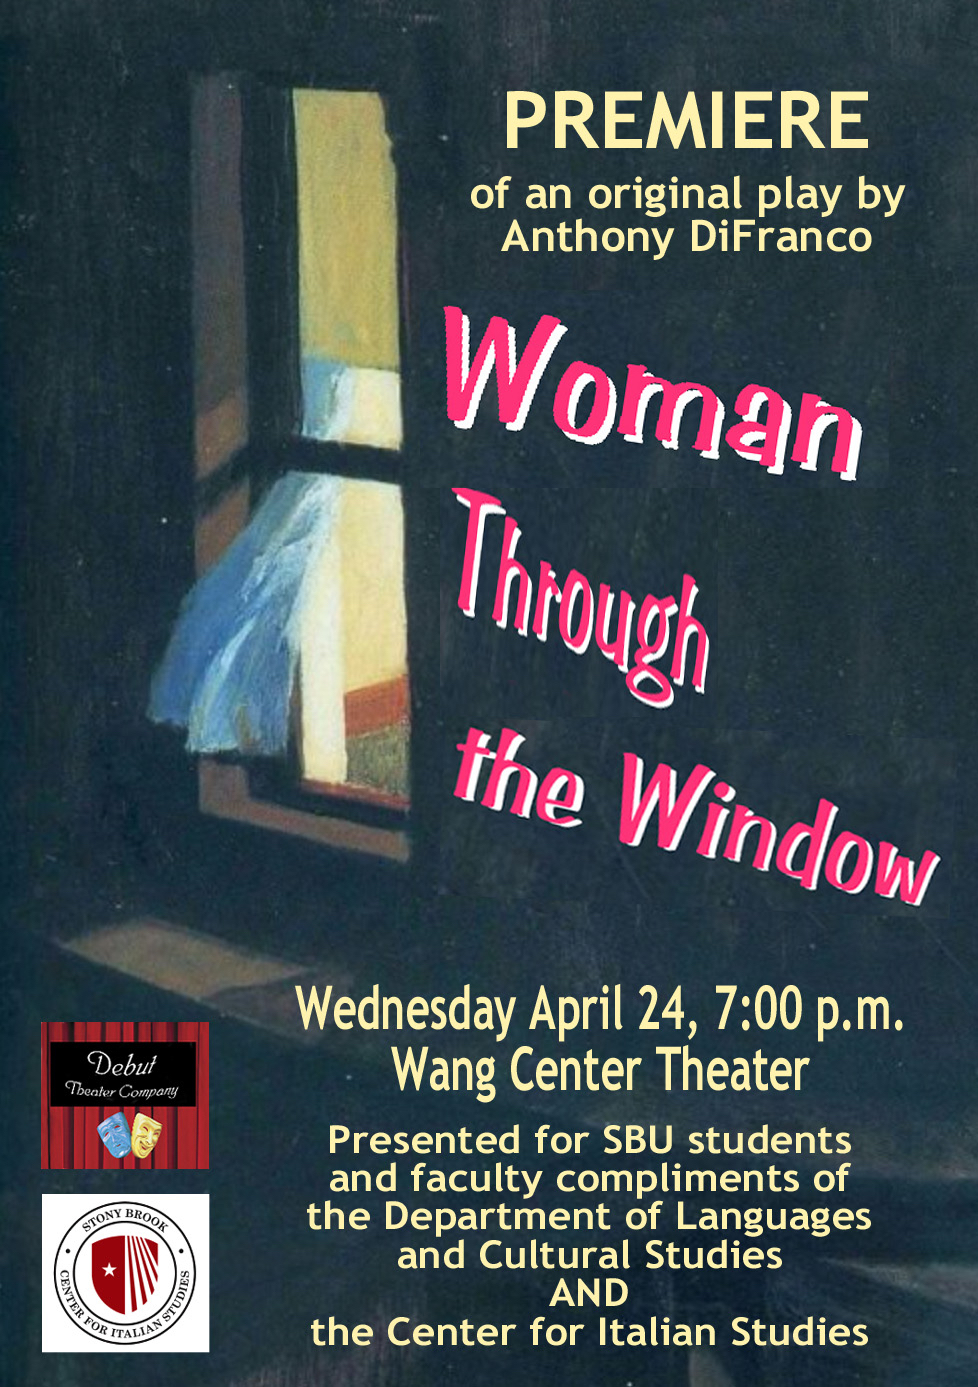 Poster advertising the new Anthony DiFranco play Woman through the Window